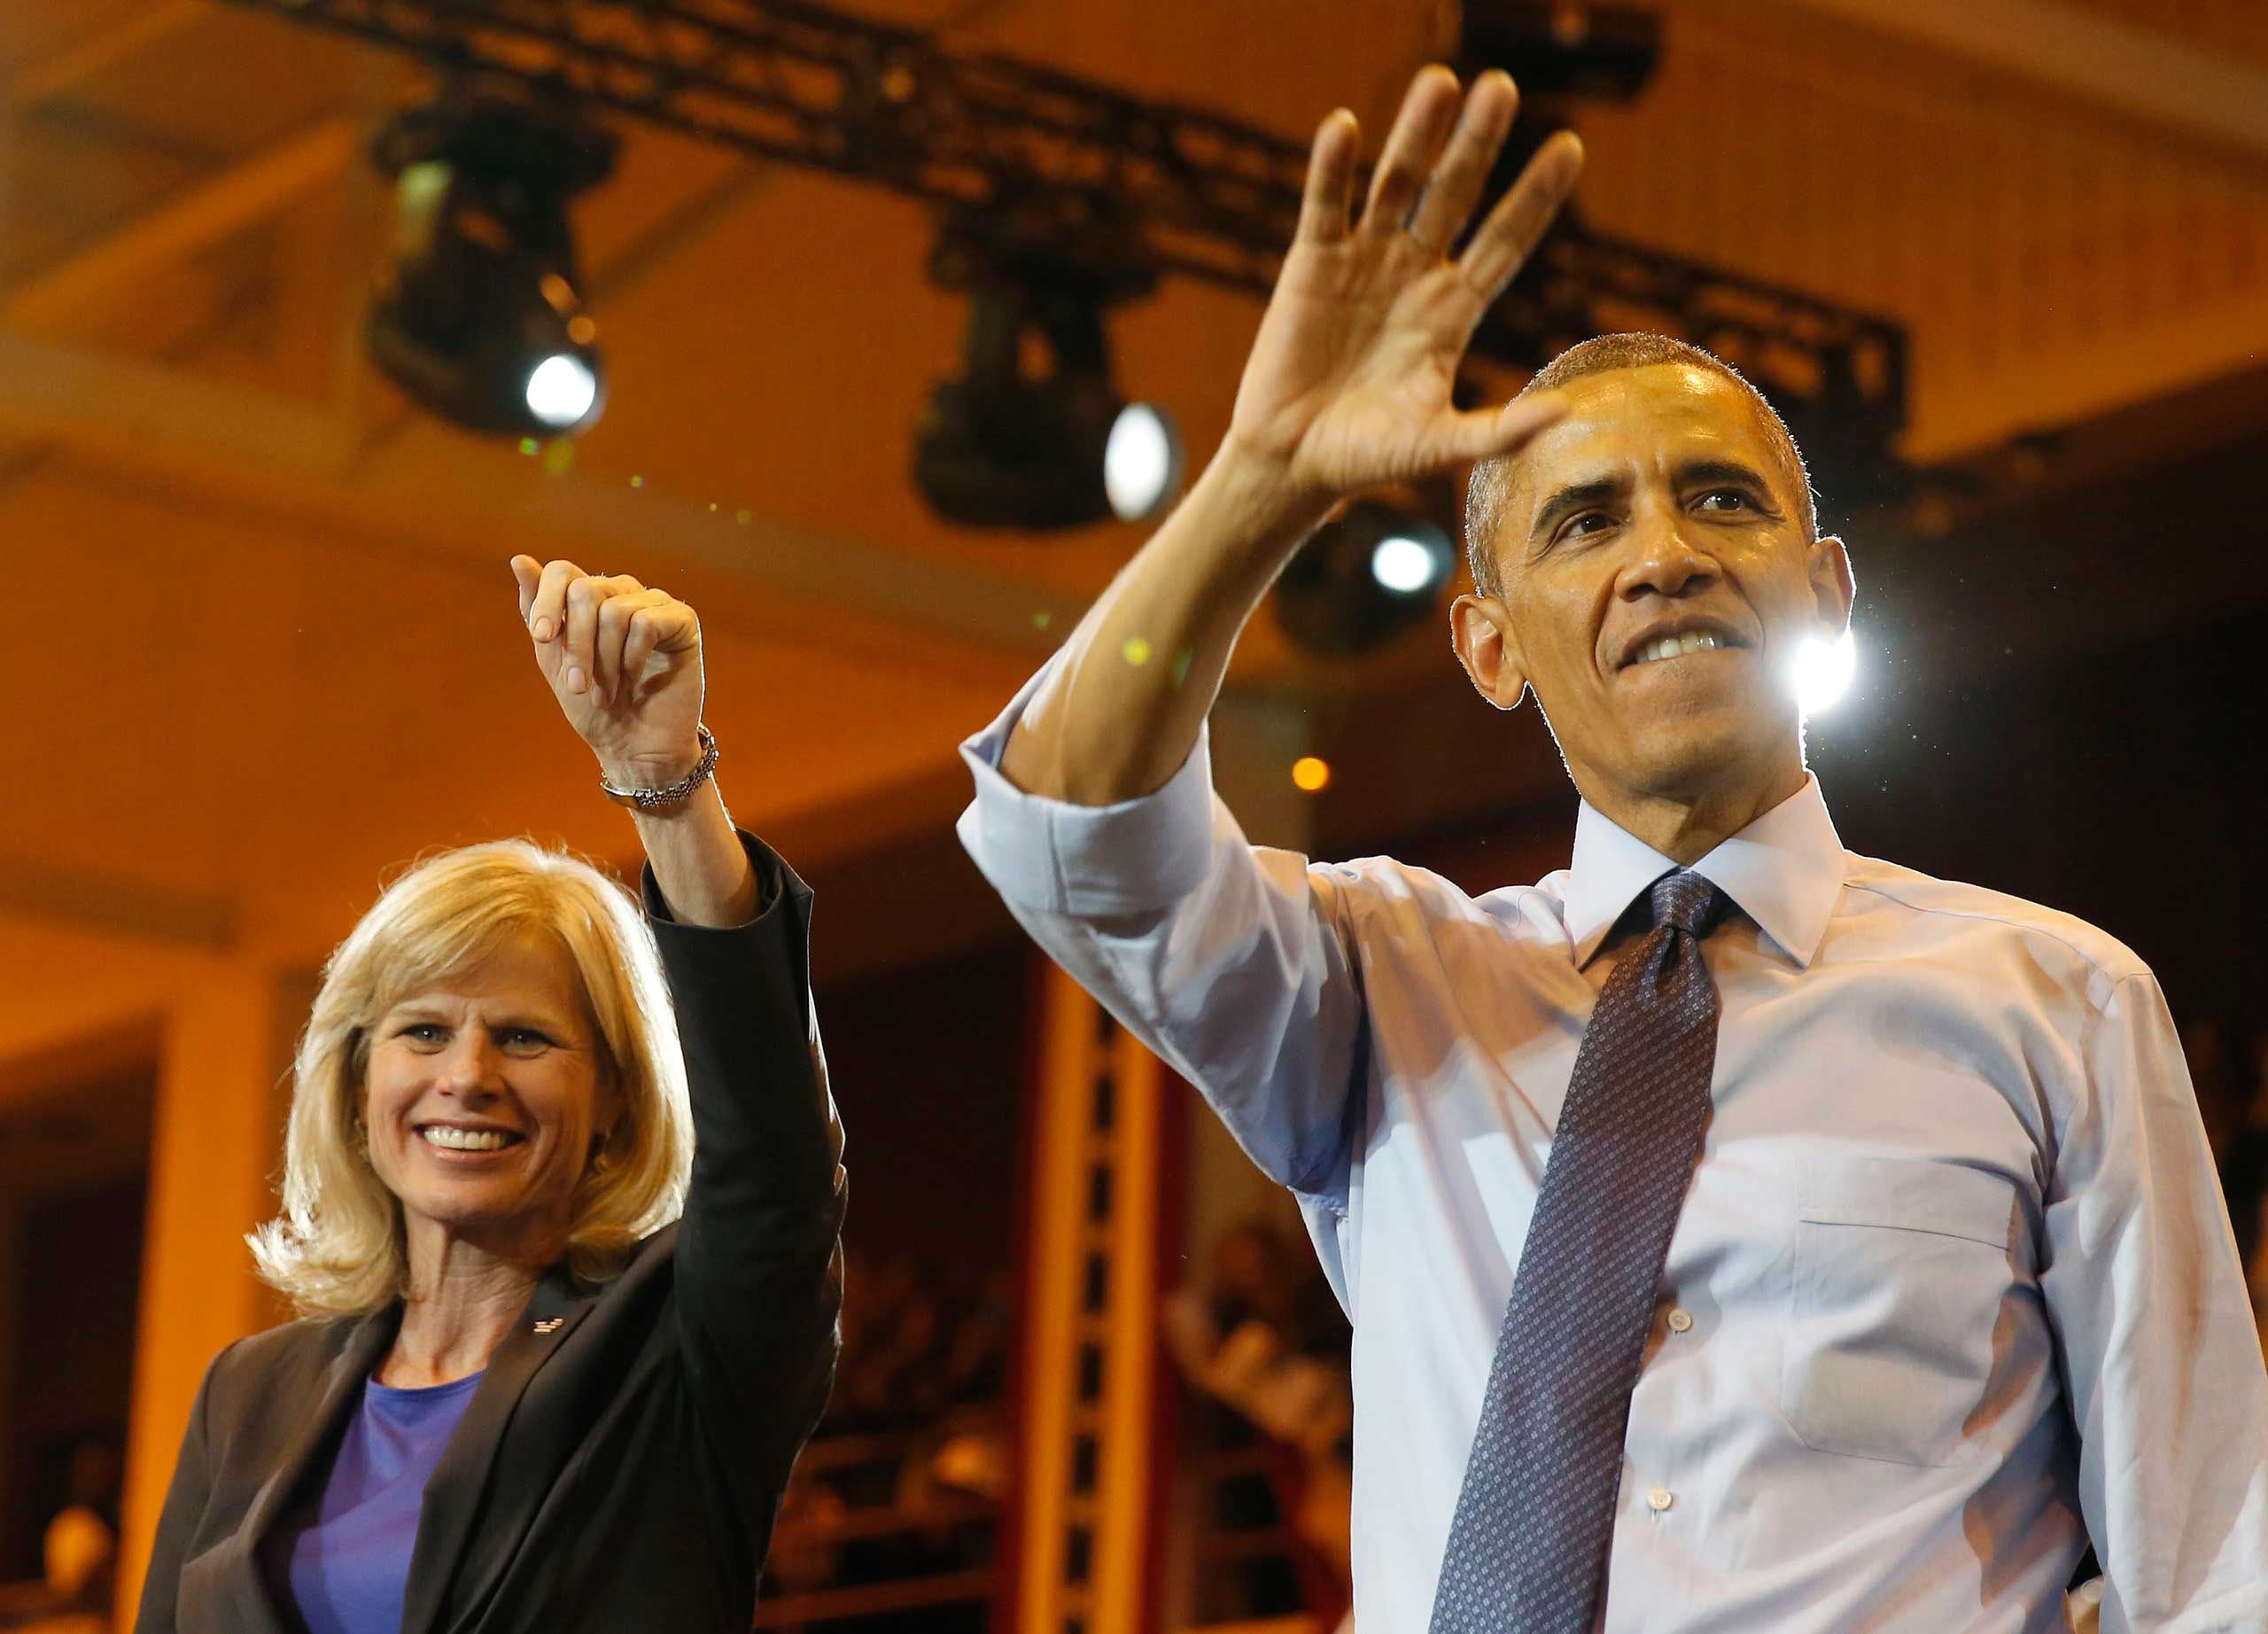 President Obama attends a campaign event with Democratic candidate for Wisconsin Gov. Mary Burke while at North Division High School in Milwaukee, Oct. 28, 2014. (Larry Downing—Reuters)